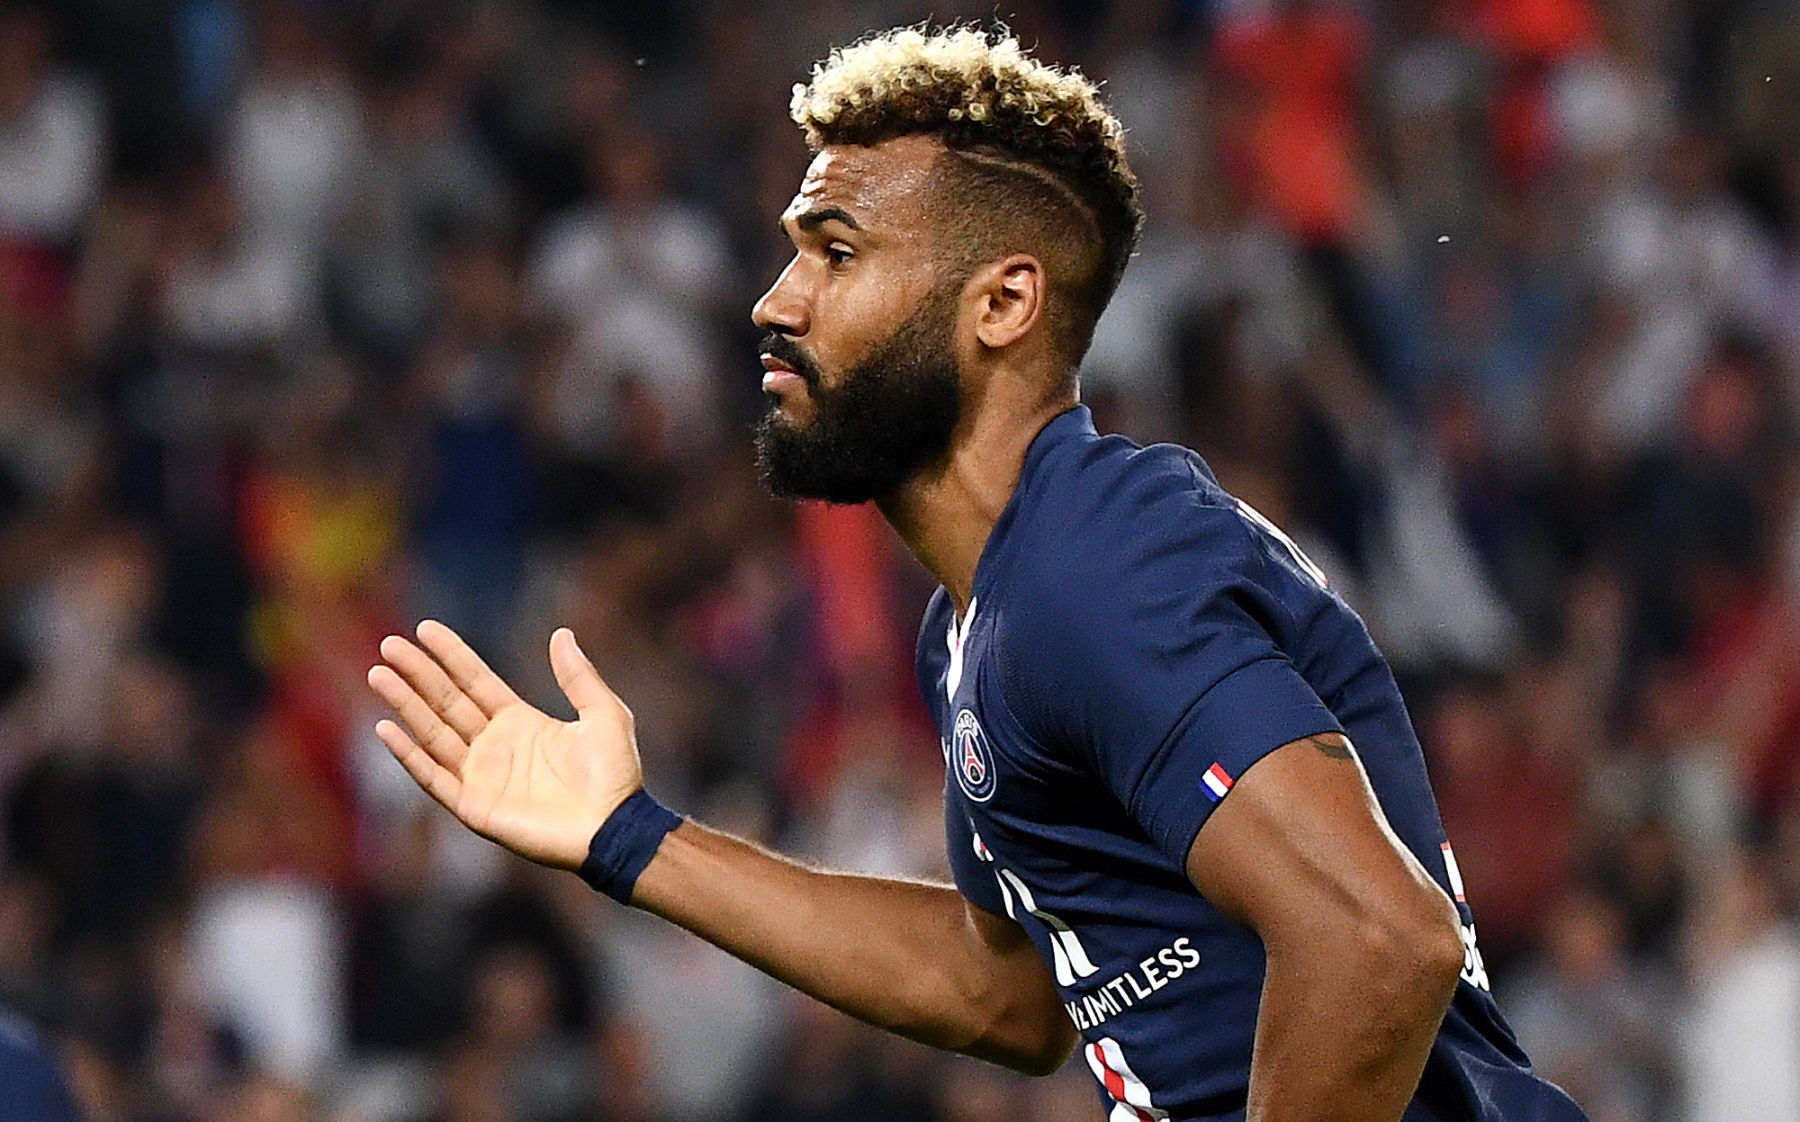 PSG’s Official Starting Lineup for Brugge: Choupo-Moting Starts